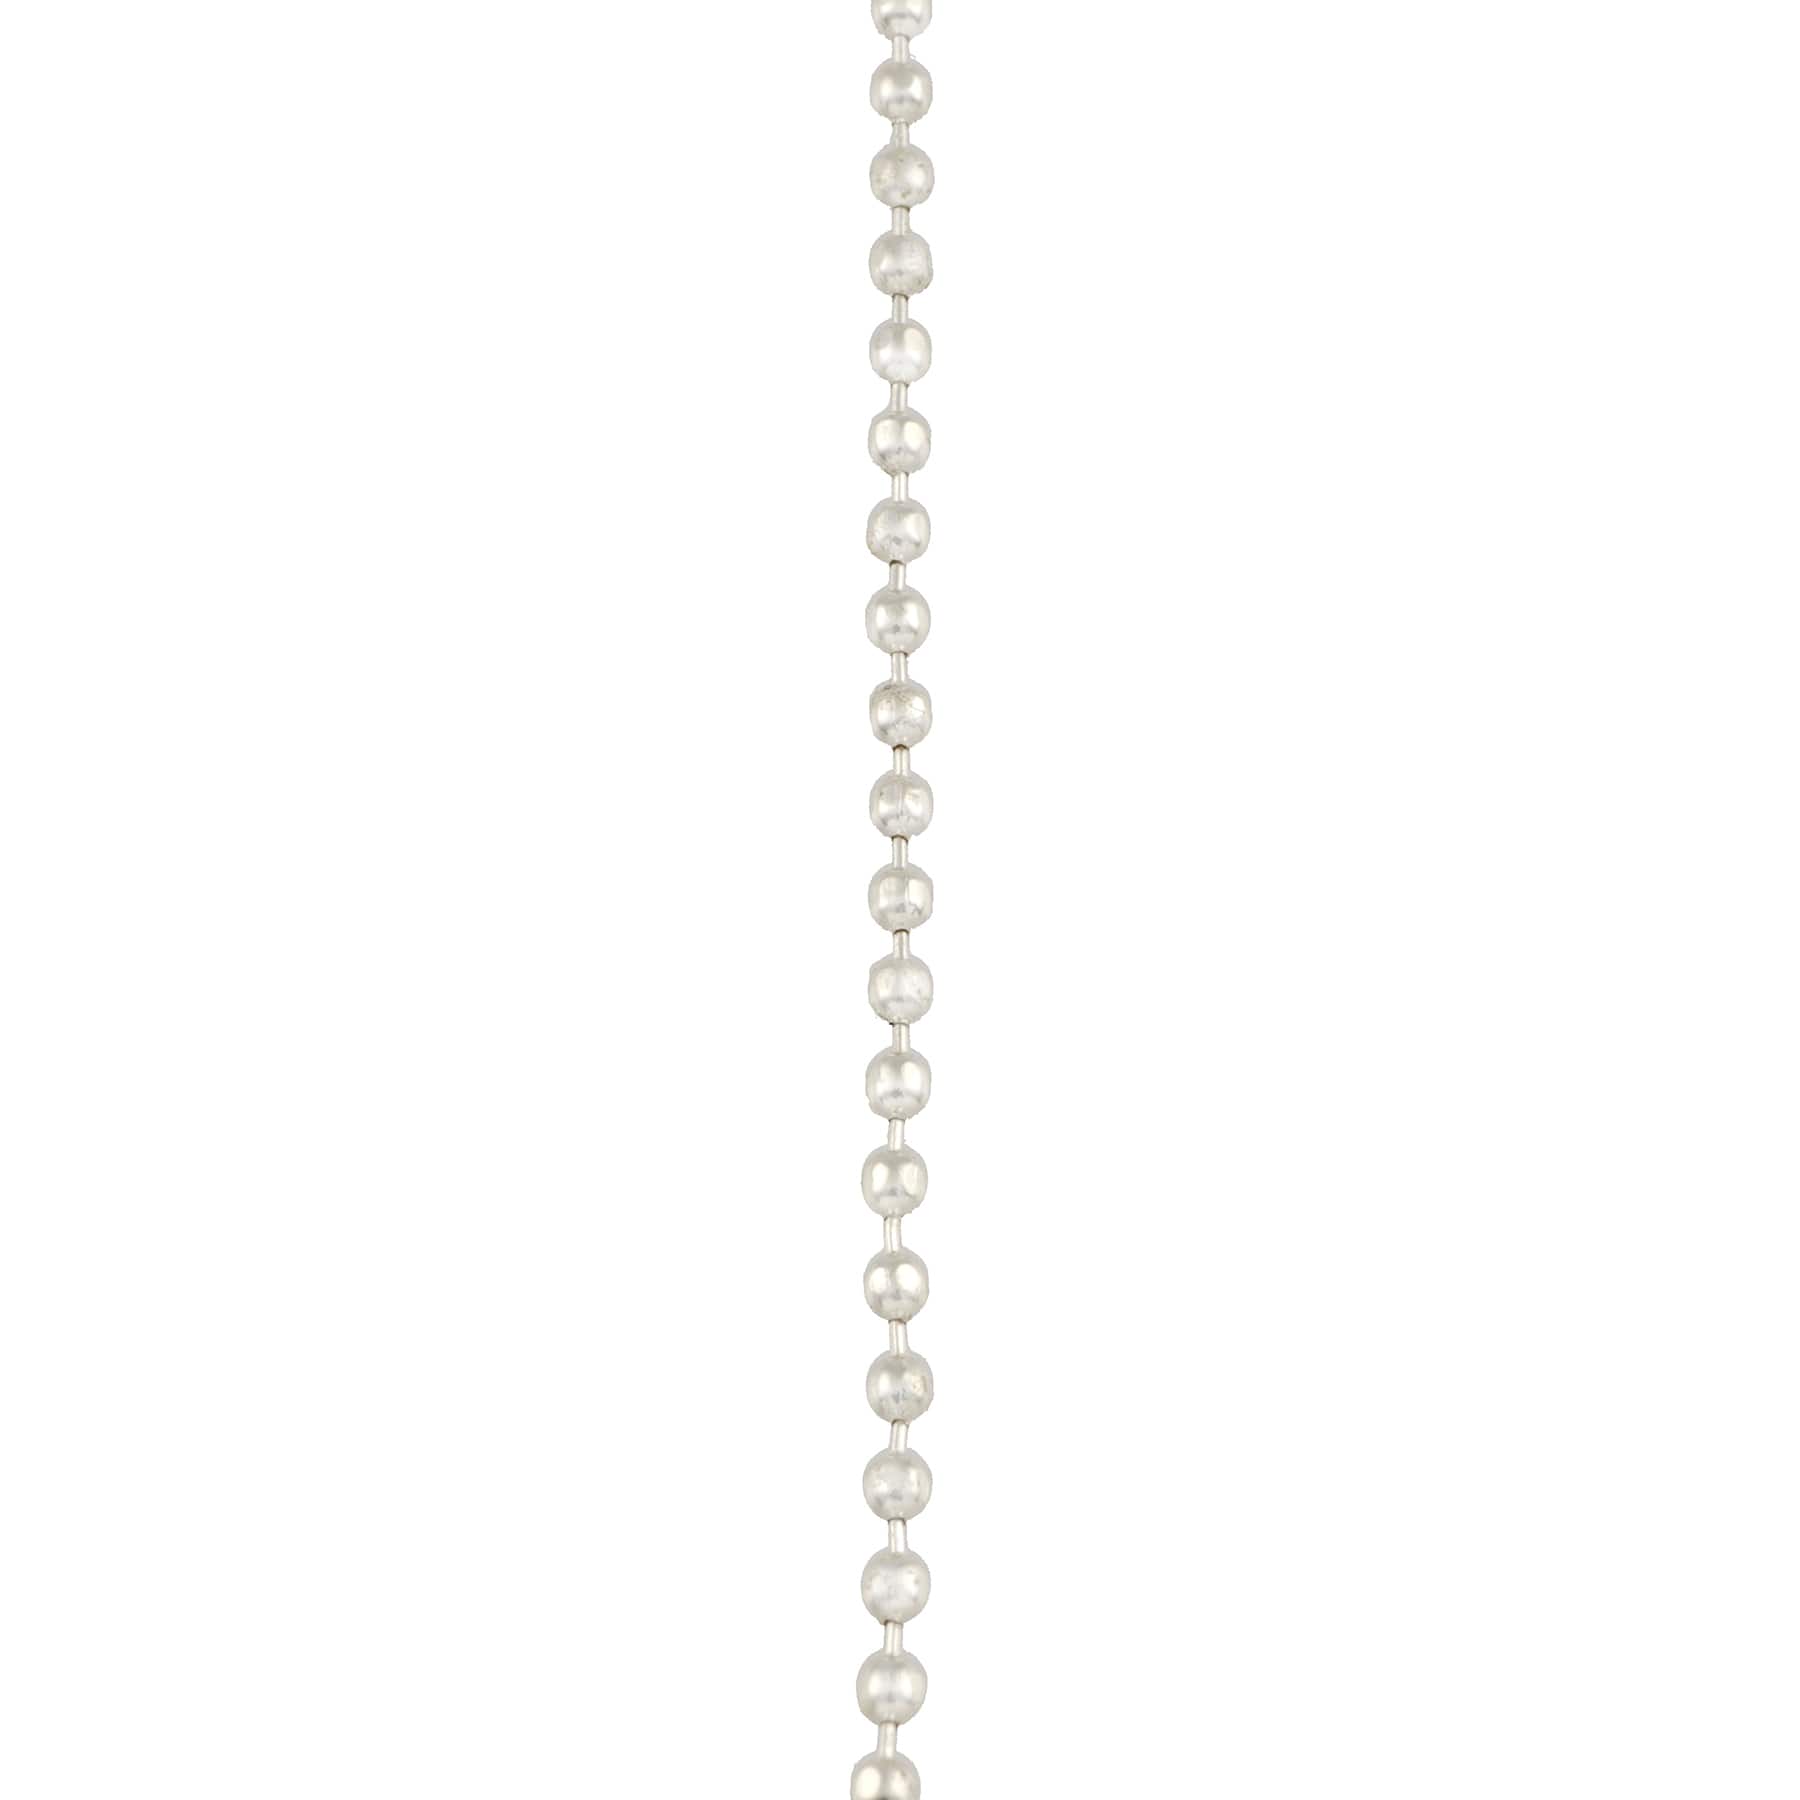 12 Packs: 3 ct. (36 total) Silver Ball Bead Necklace Set by Bead Landing&#x2122;